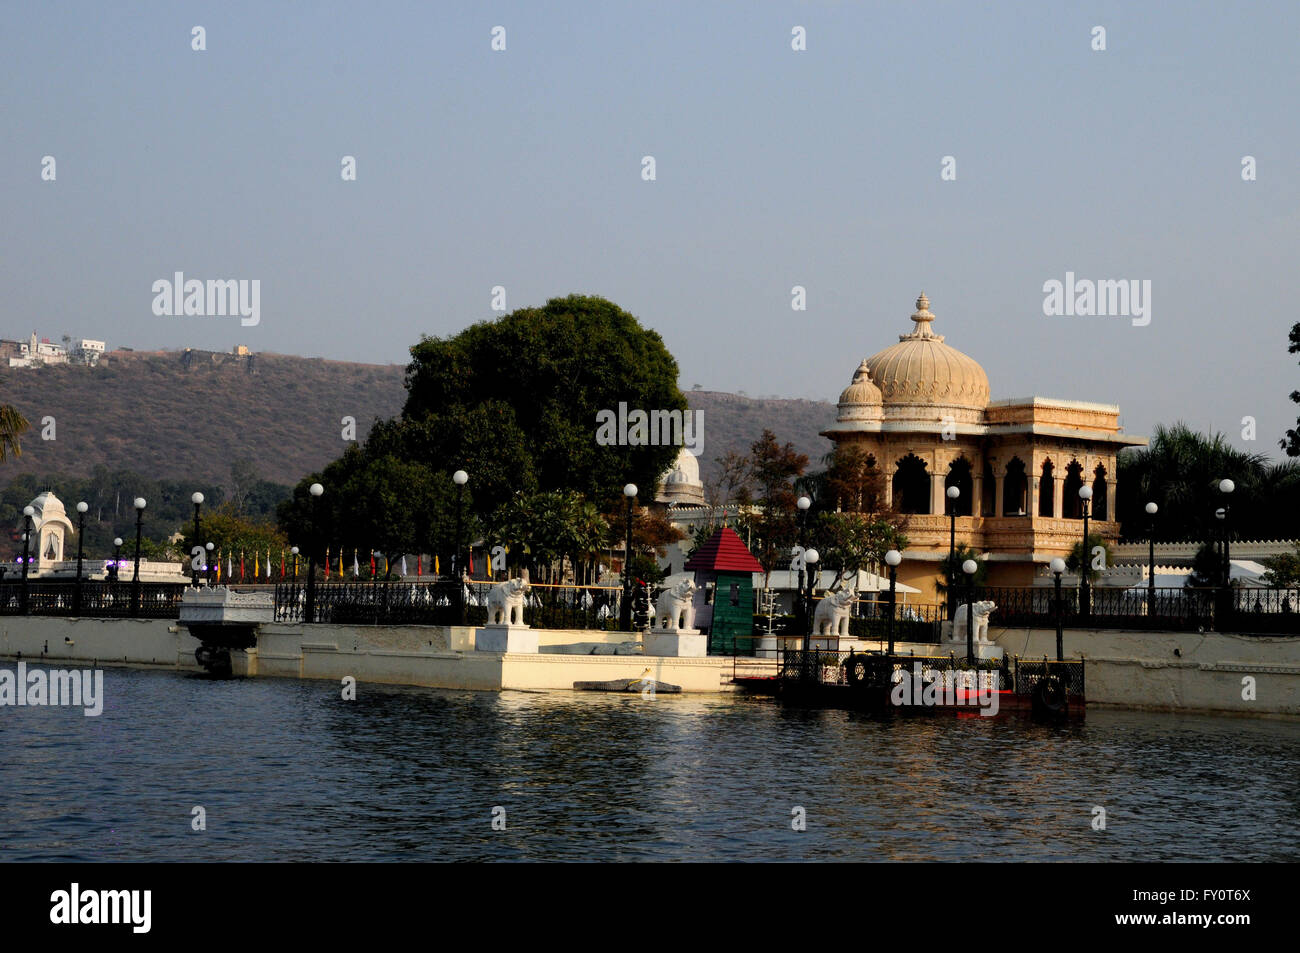 Jag Mandir, or the Lake Garden Palace, is built on an island in Lake Pichola, Udaipur, India. Stock Photo